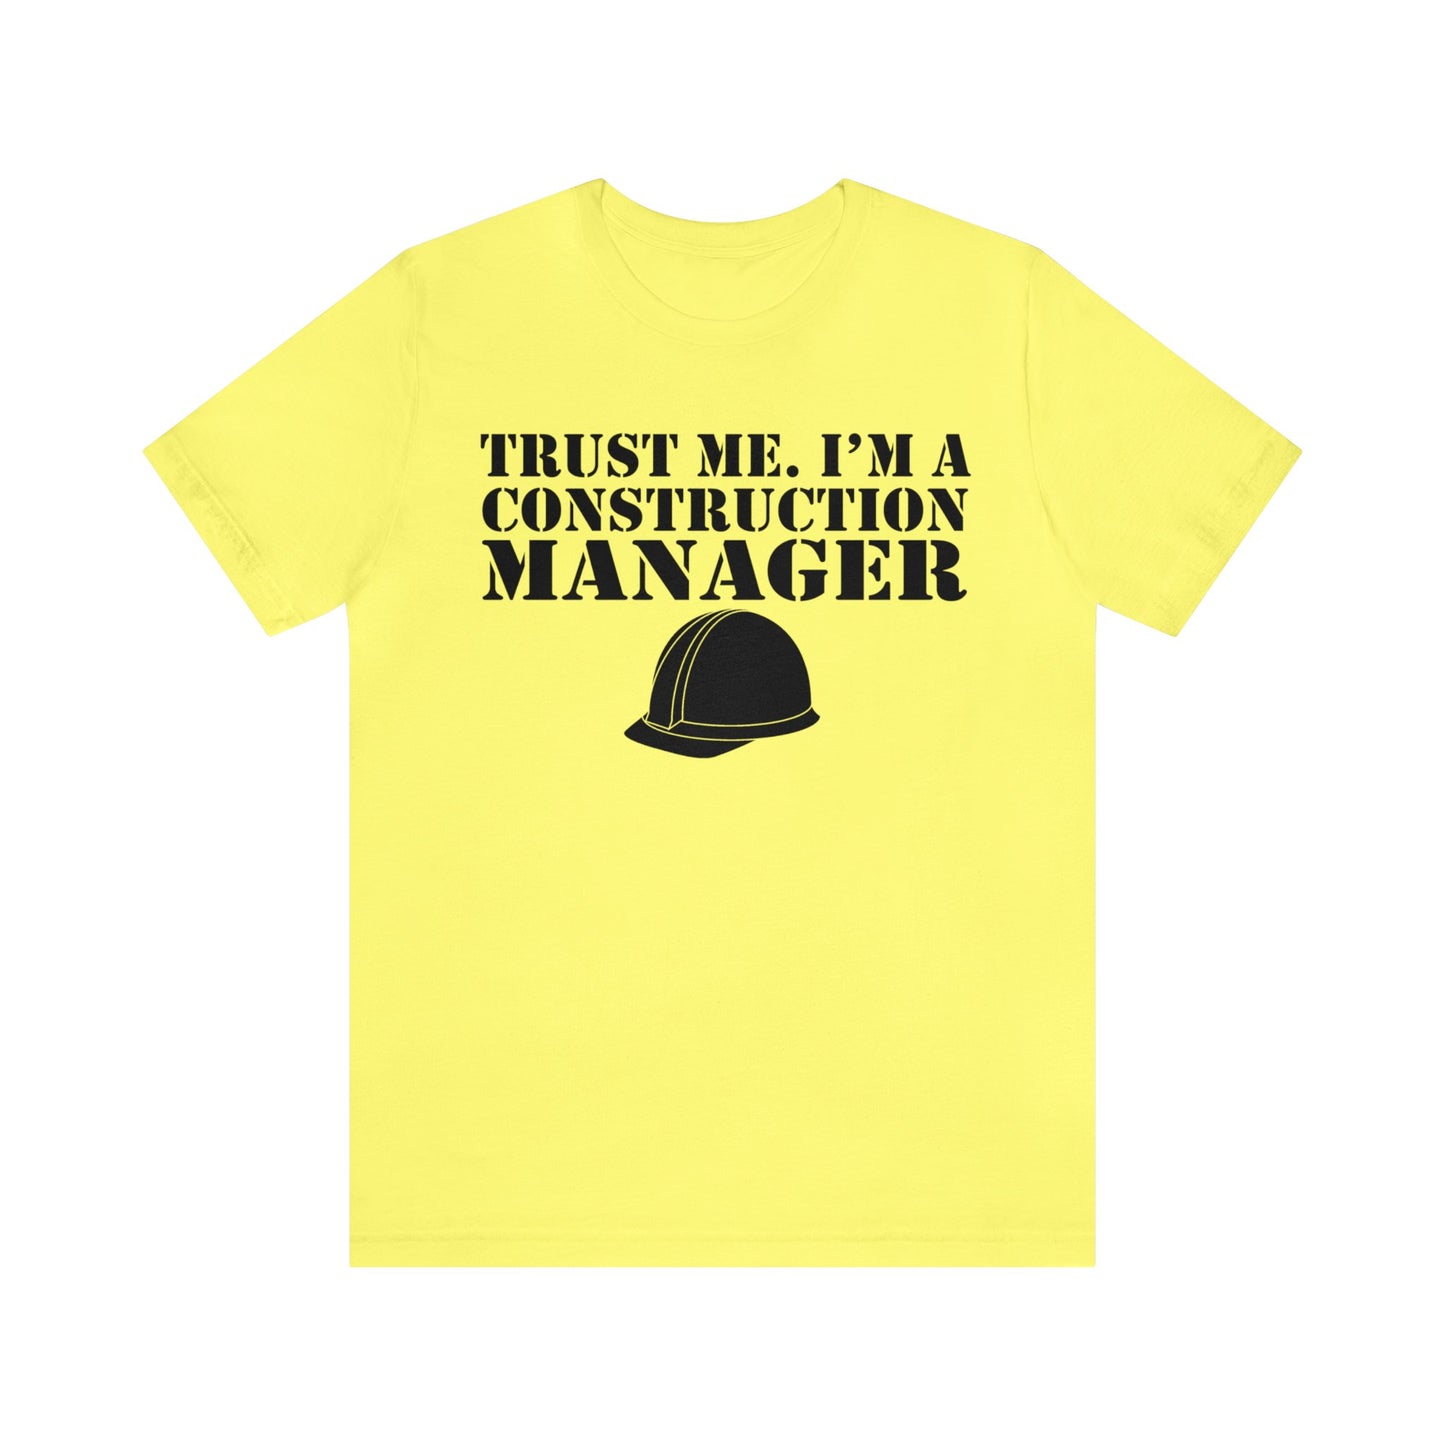 Trust Me I'm a Construction Manager Tee – Perfect Gift for Building Pros